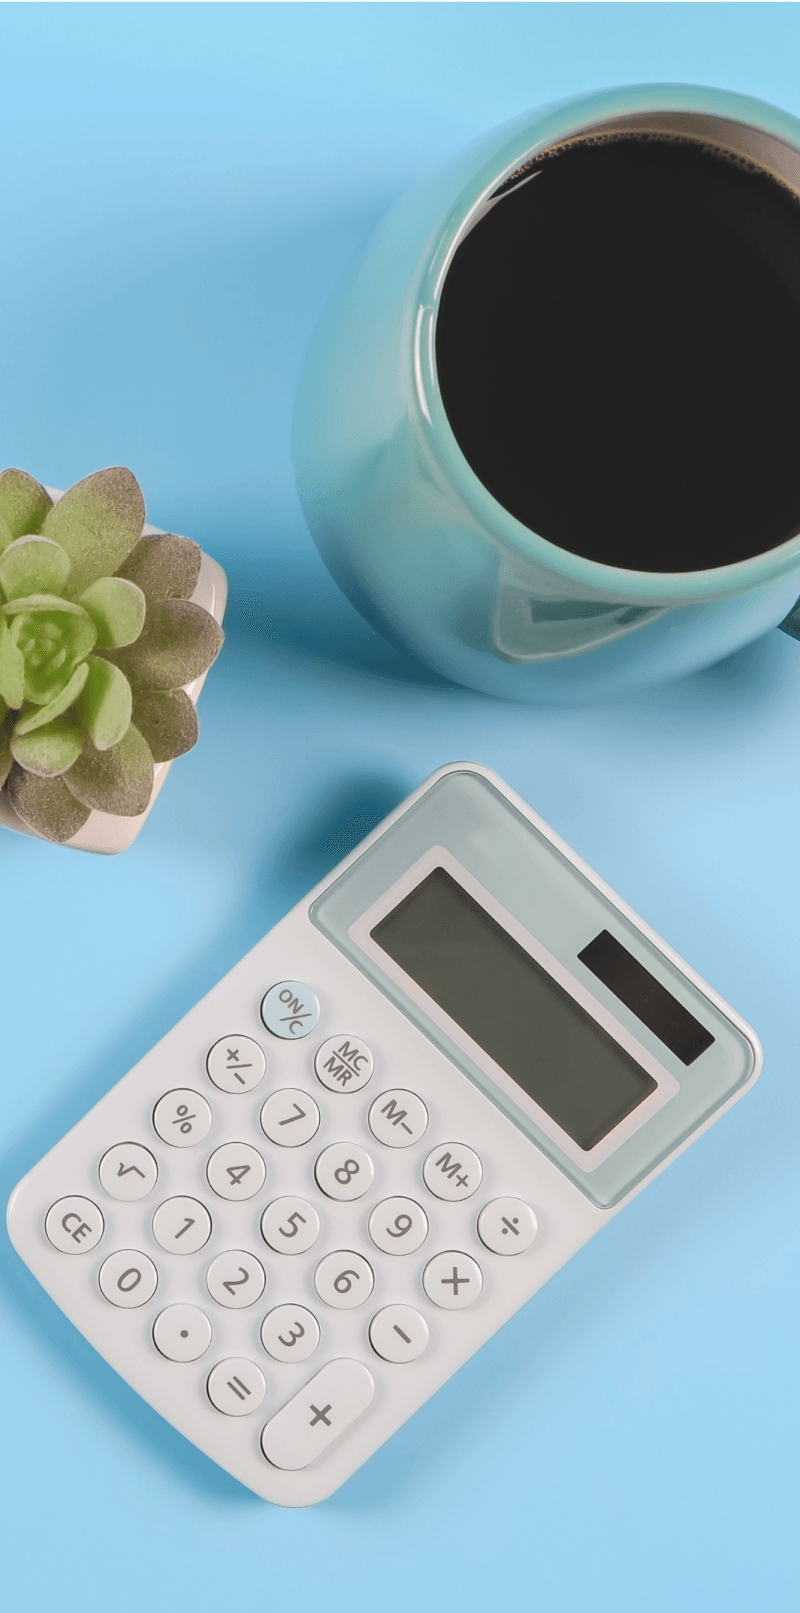 Cup of coffee and calculator